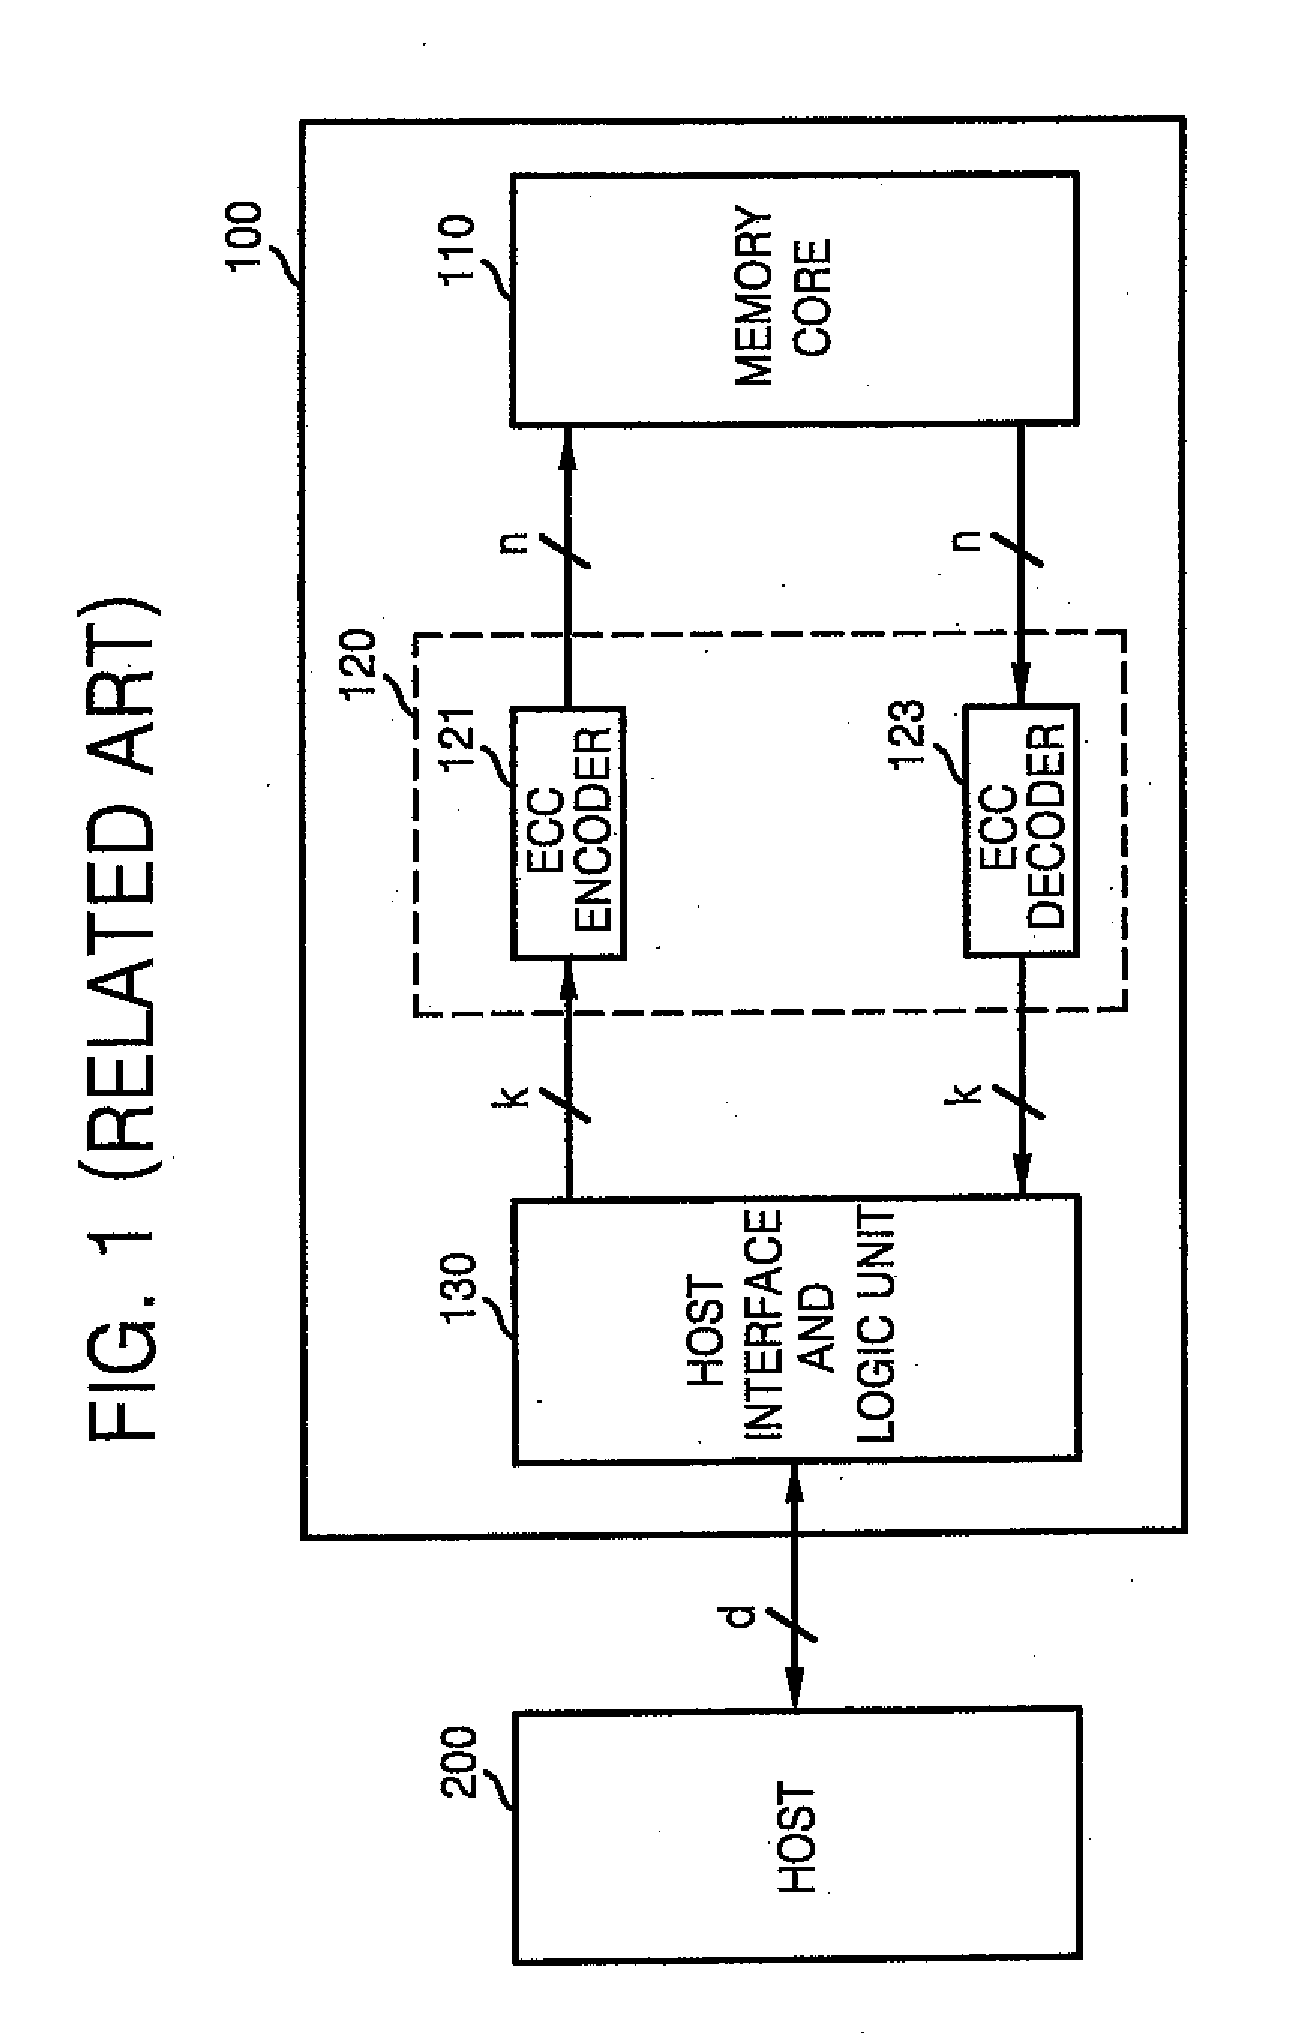 Error correction circuit and method, and semiconductor memory device including the circuit